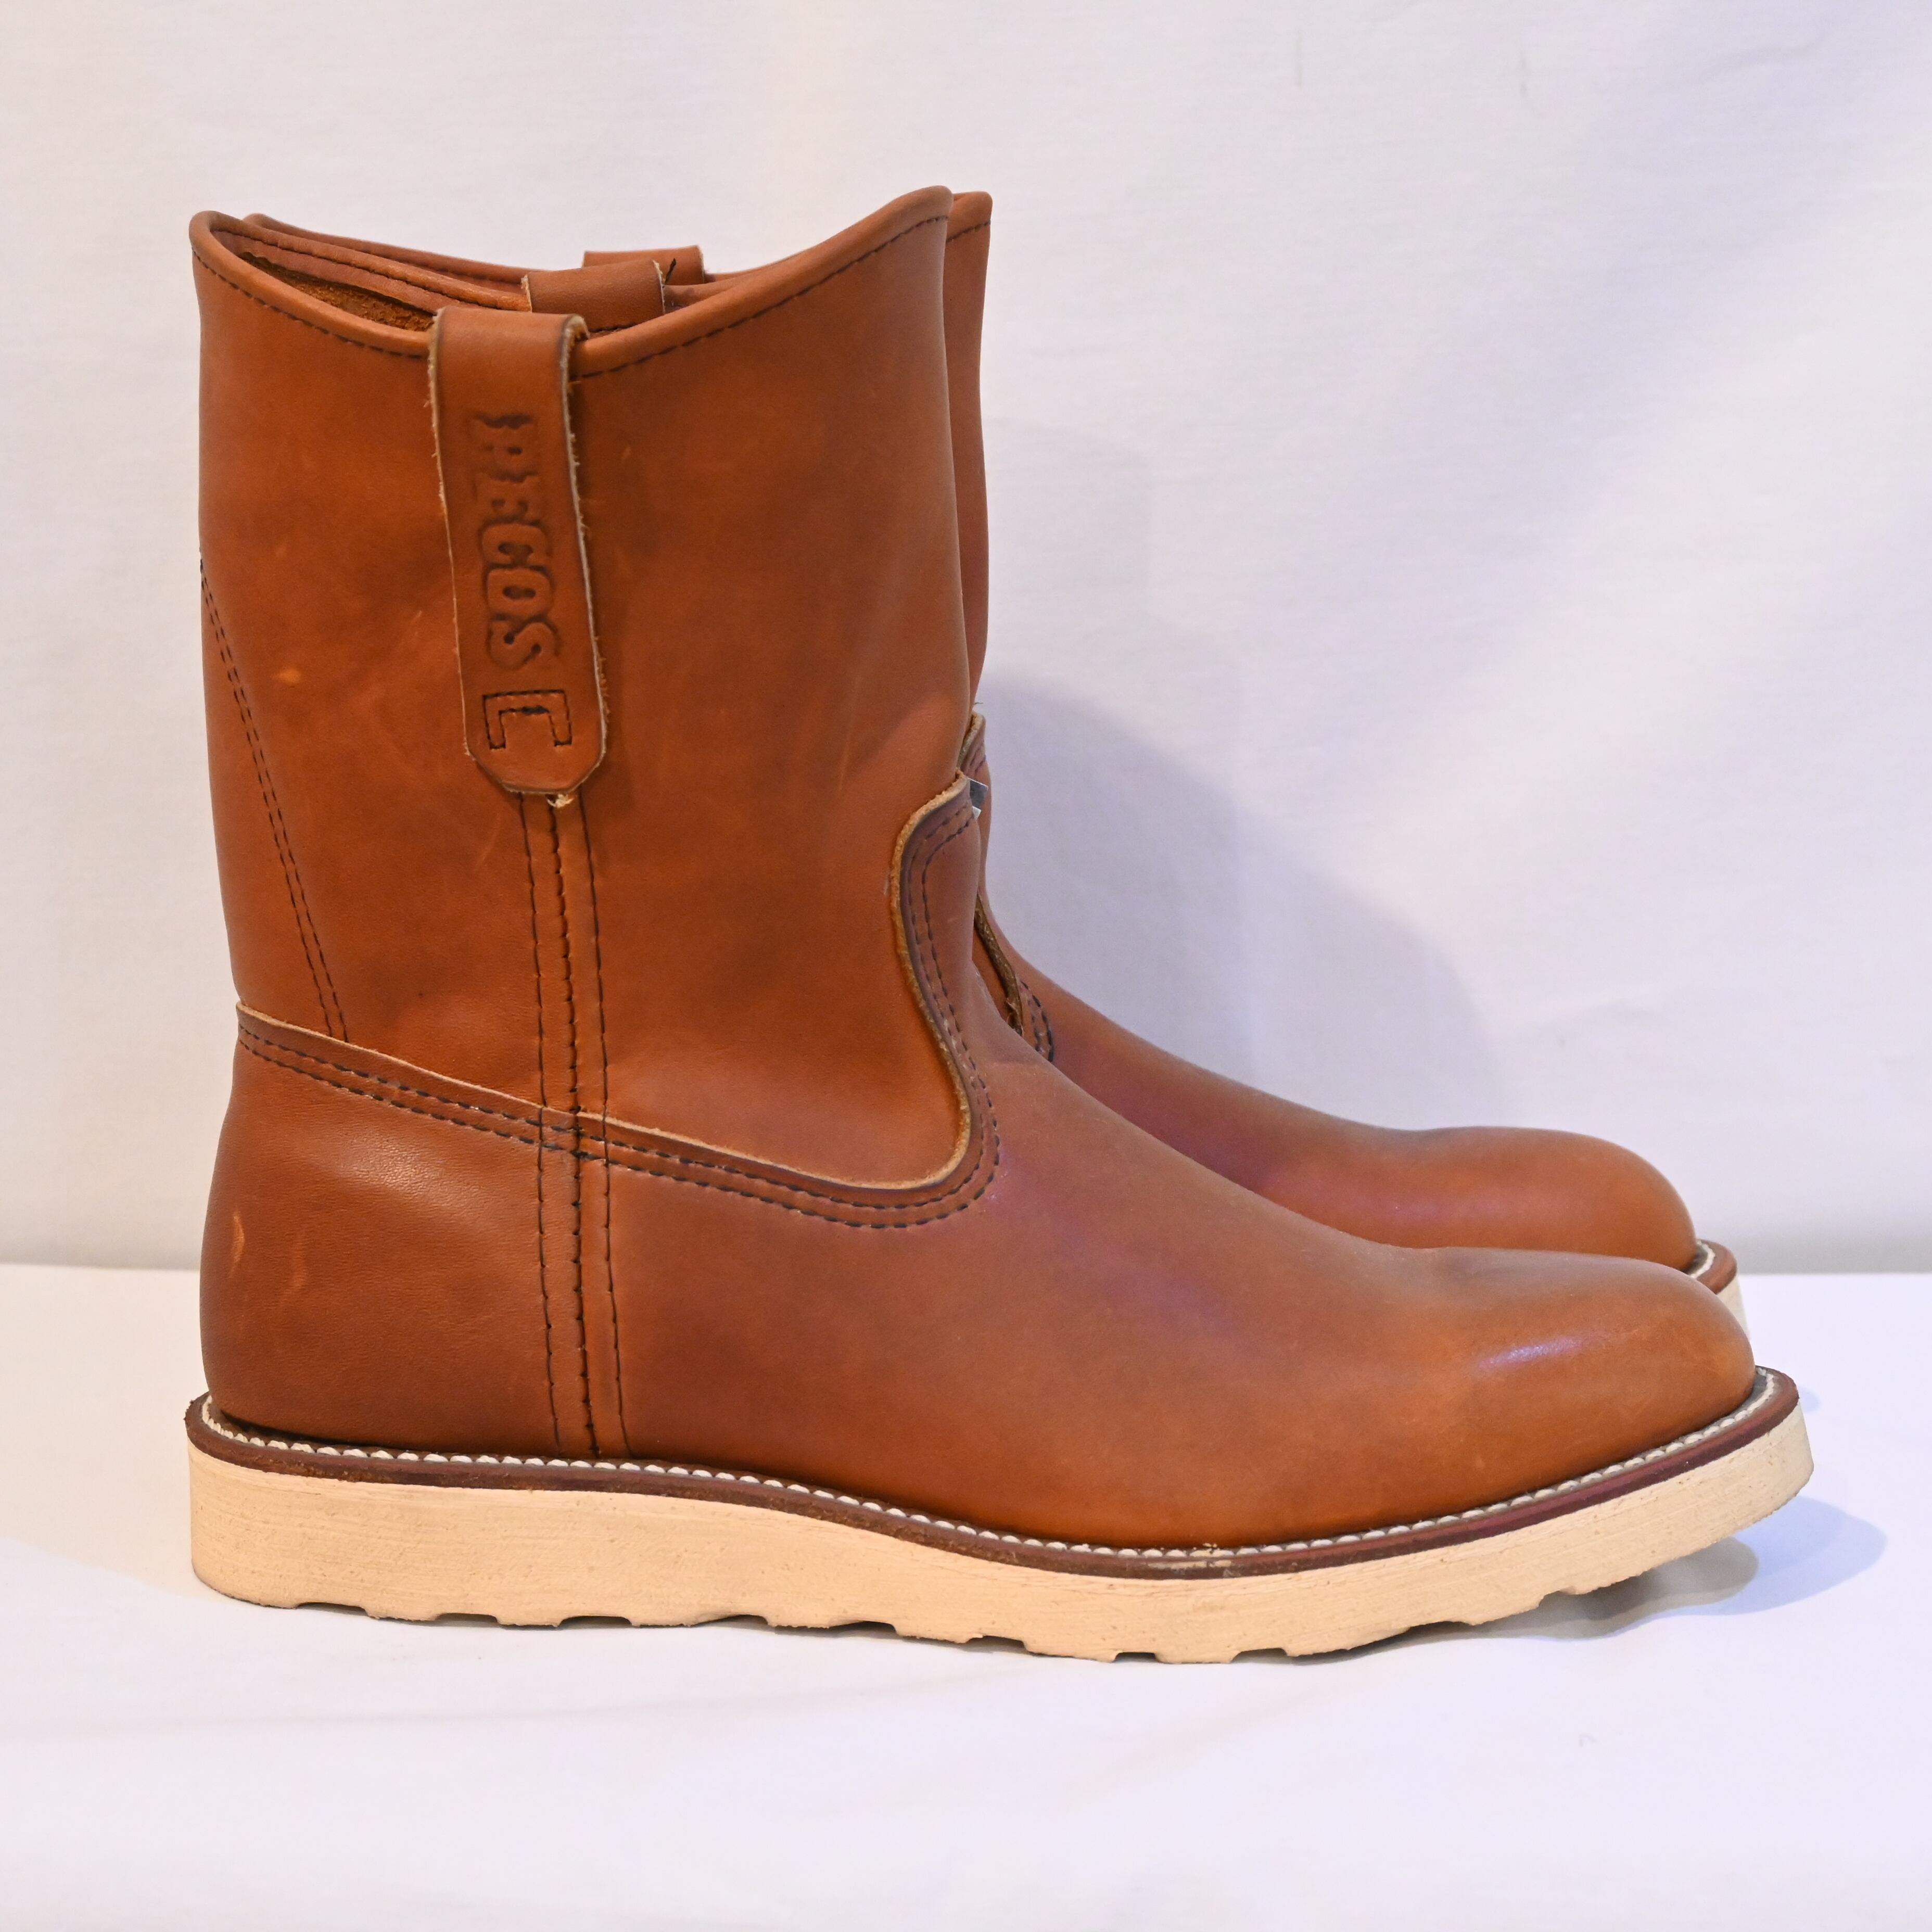 Red Wing pecos boots 866 made in USA レッドウイング